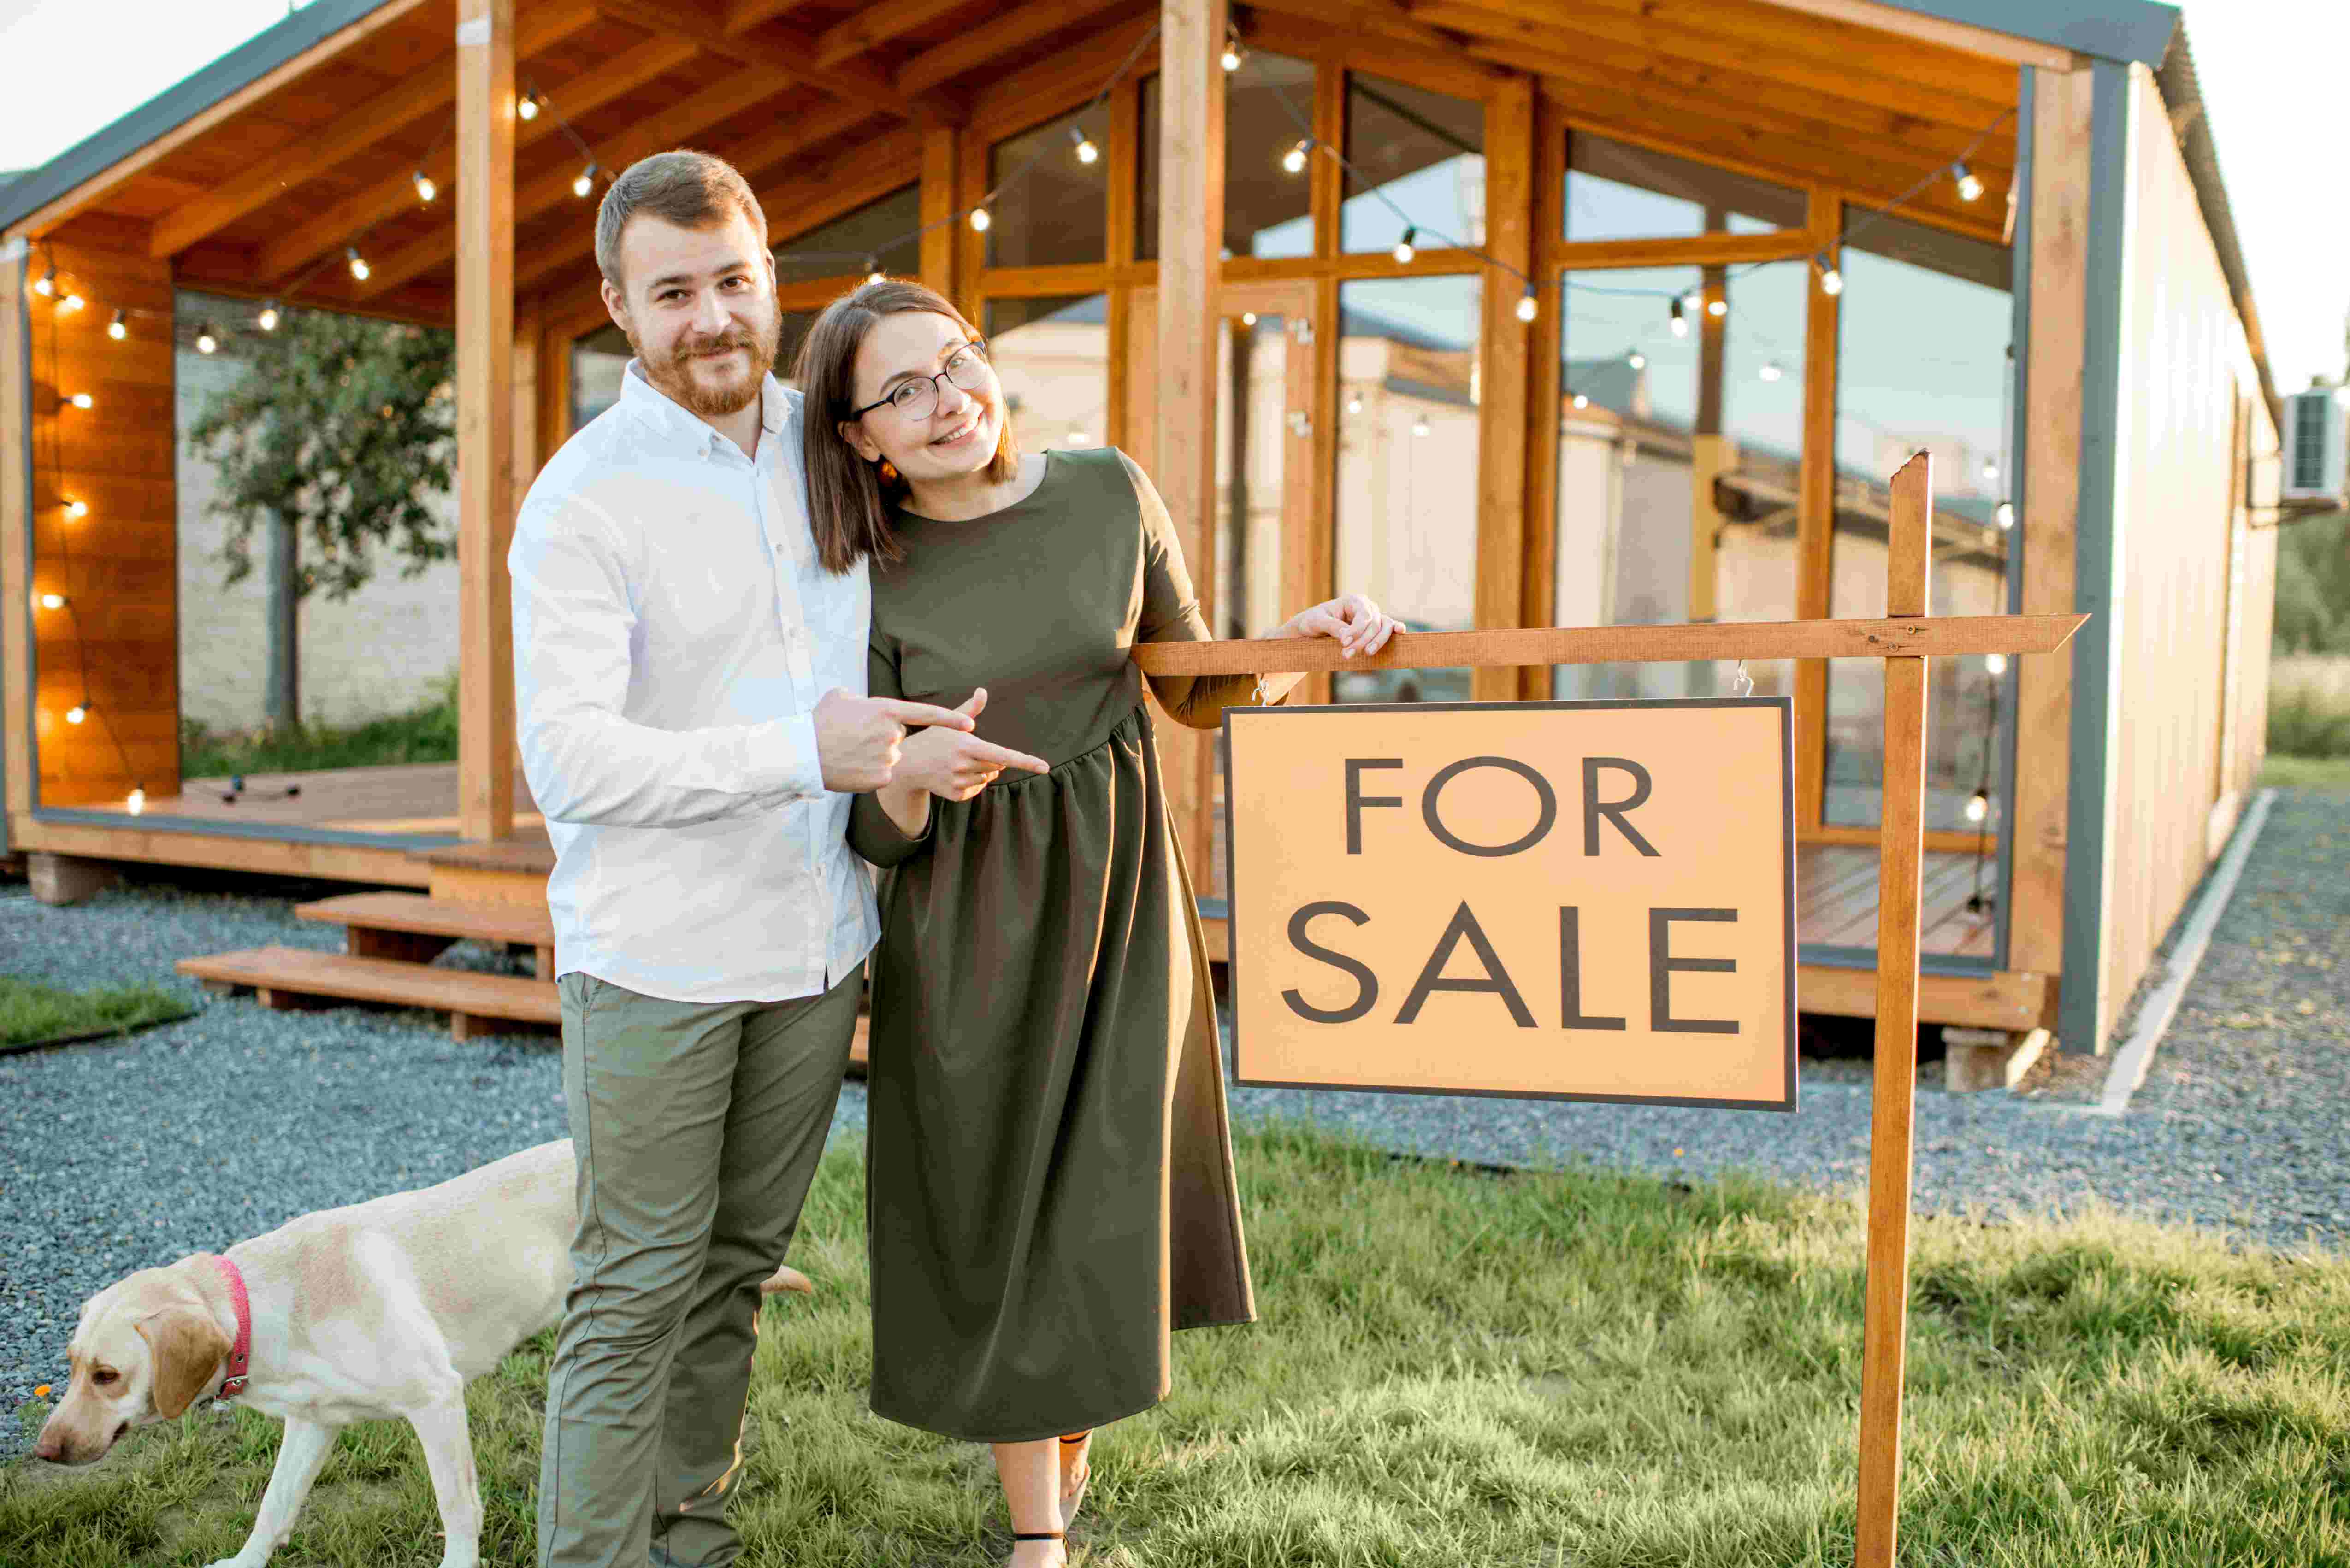 Is it easier to find the right buyer for your house through a broker?